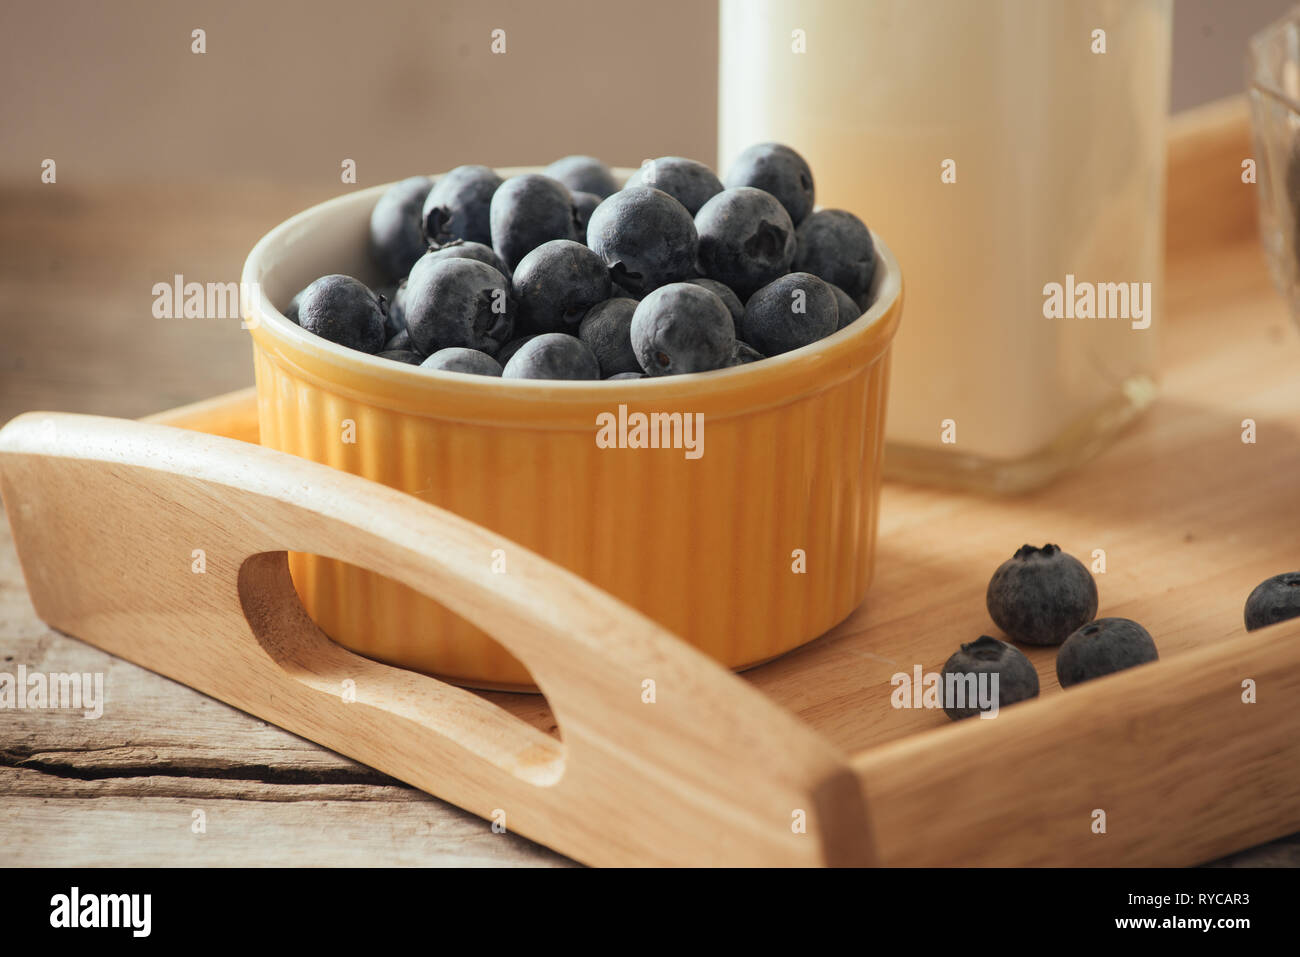 Healthy vegan breakfast. Bottled milk with chia, almond, fresh fruit and berries over wooden table background, copy space. Clean eating, weight loss,  Stock Photo